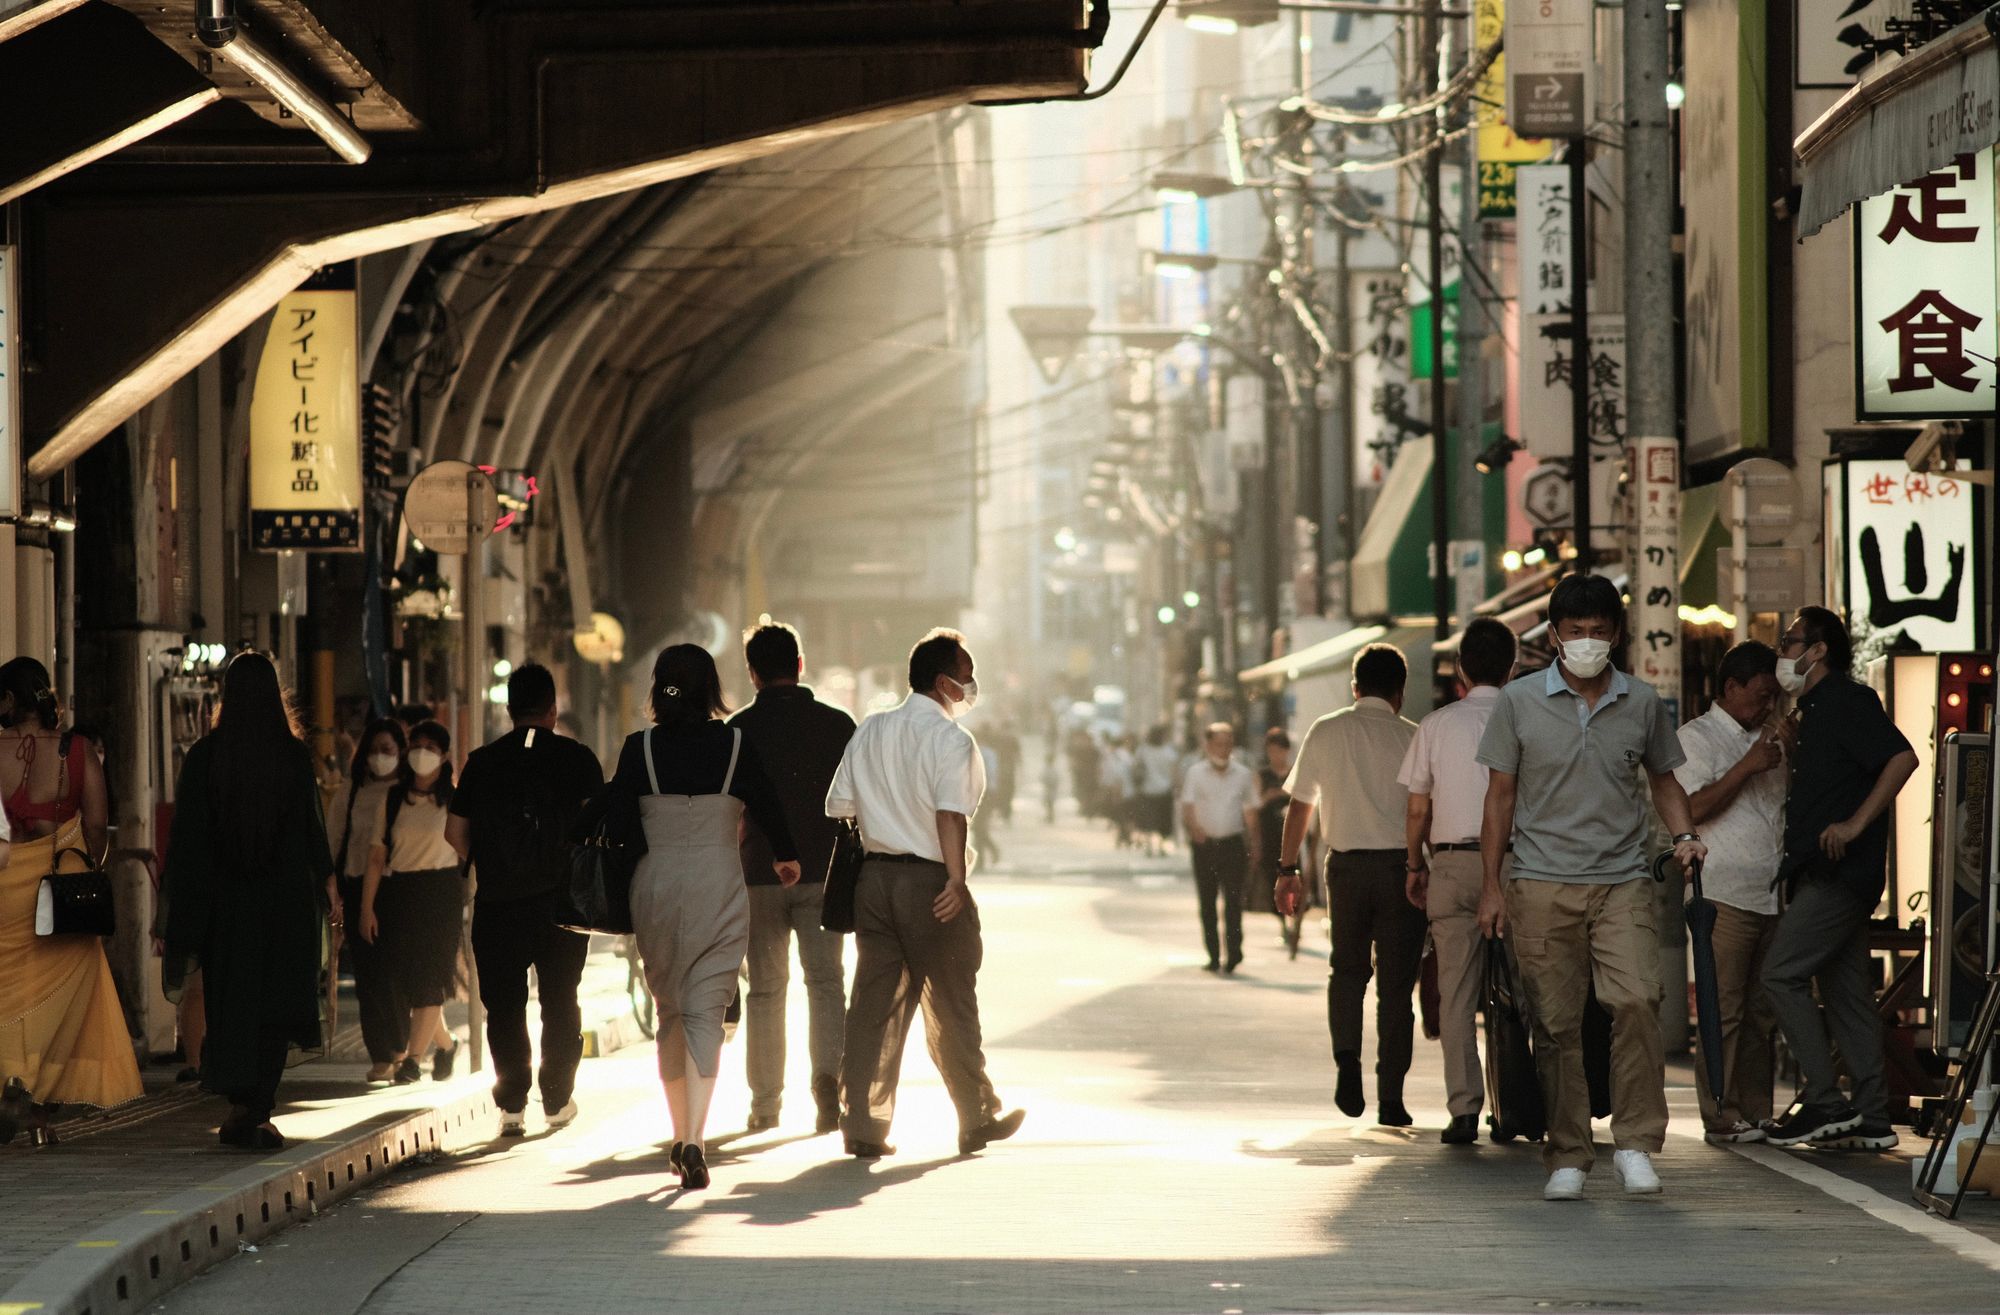 busy street scene at golden hour in tokyo